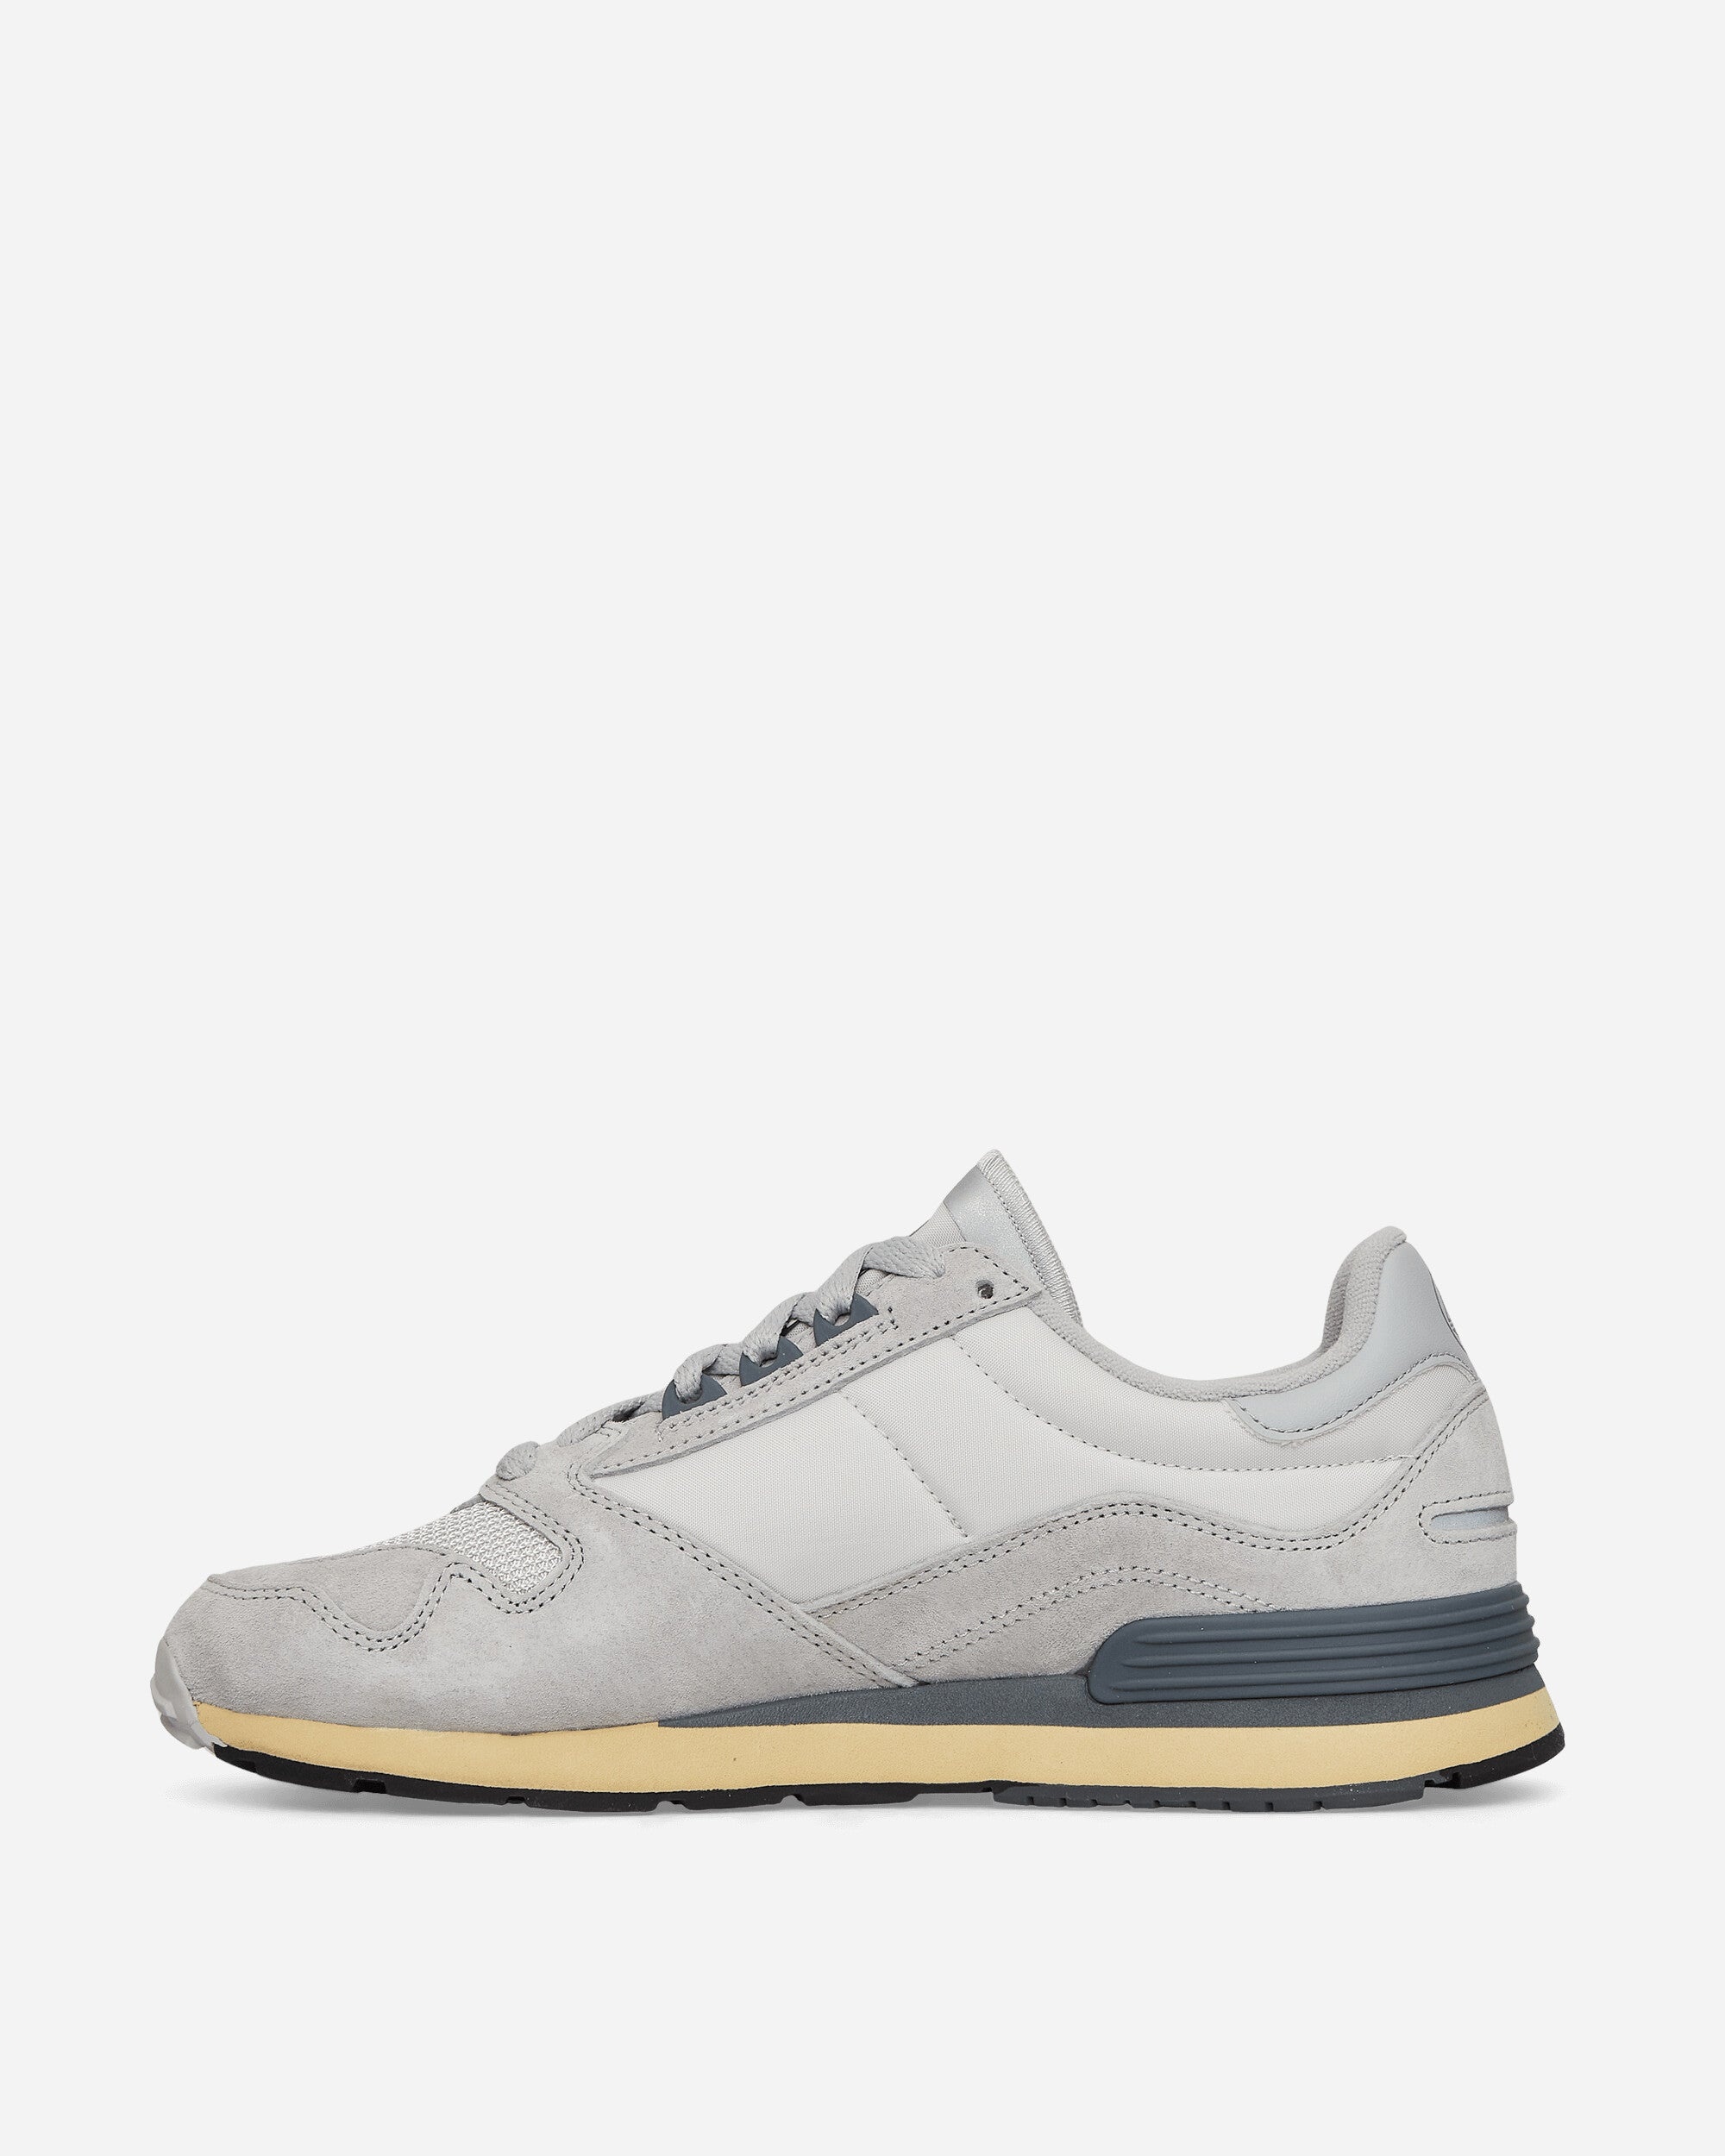 Whitworth SPZL Sneakers Grey One / Grey Two / Clear Onix - 3